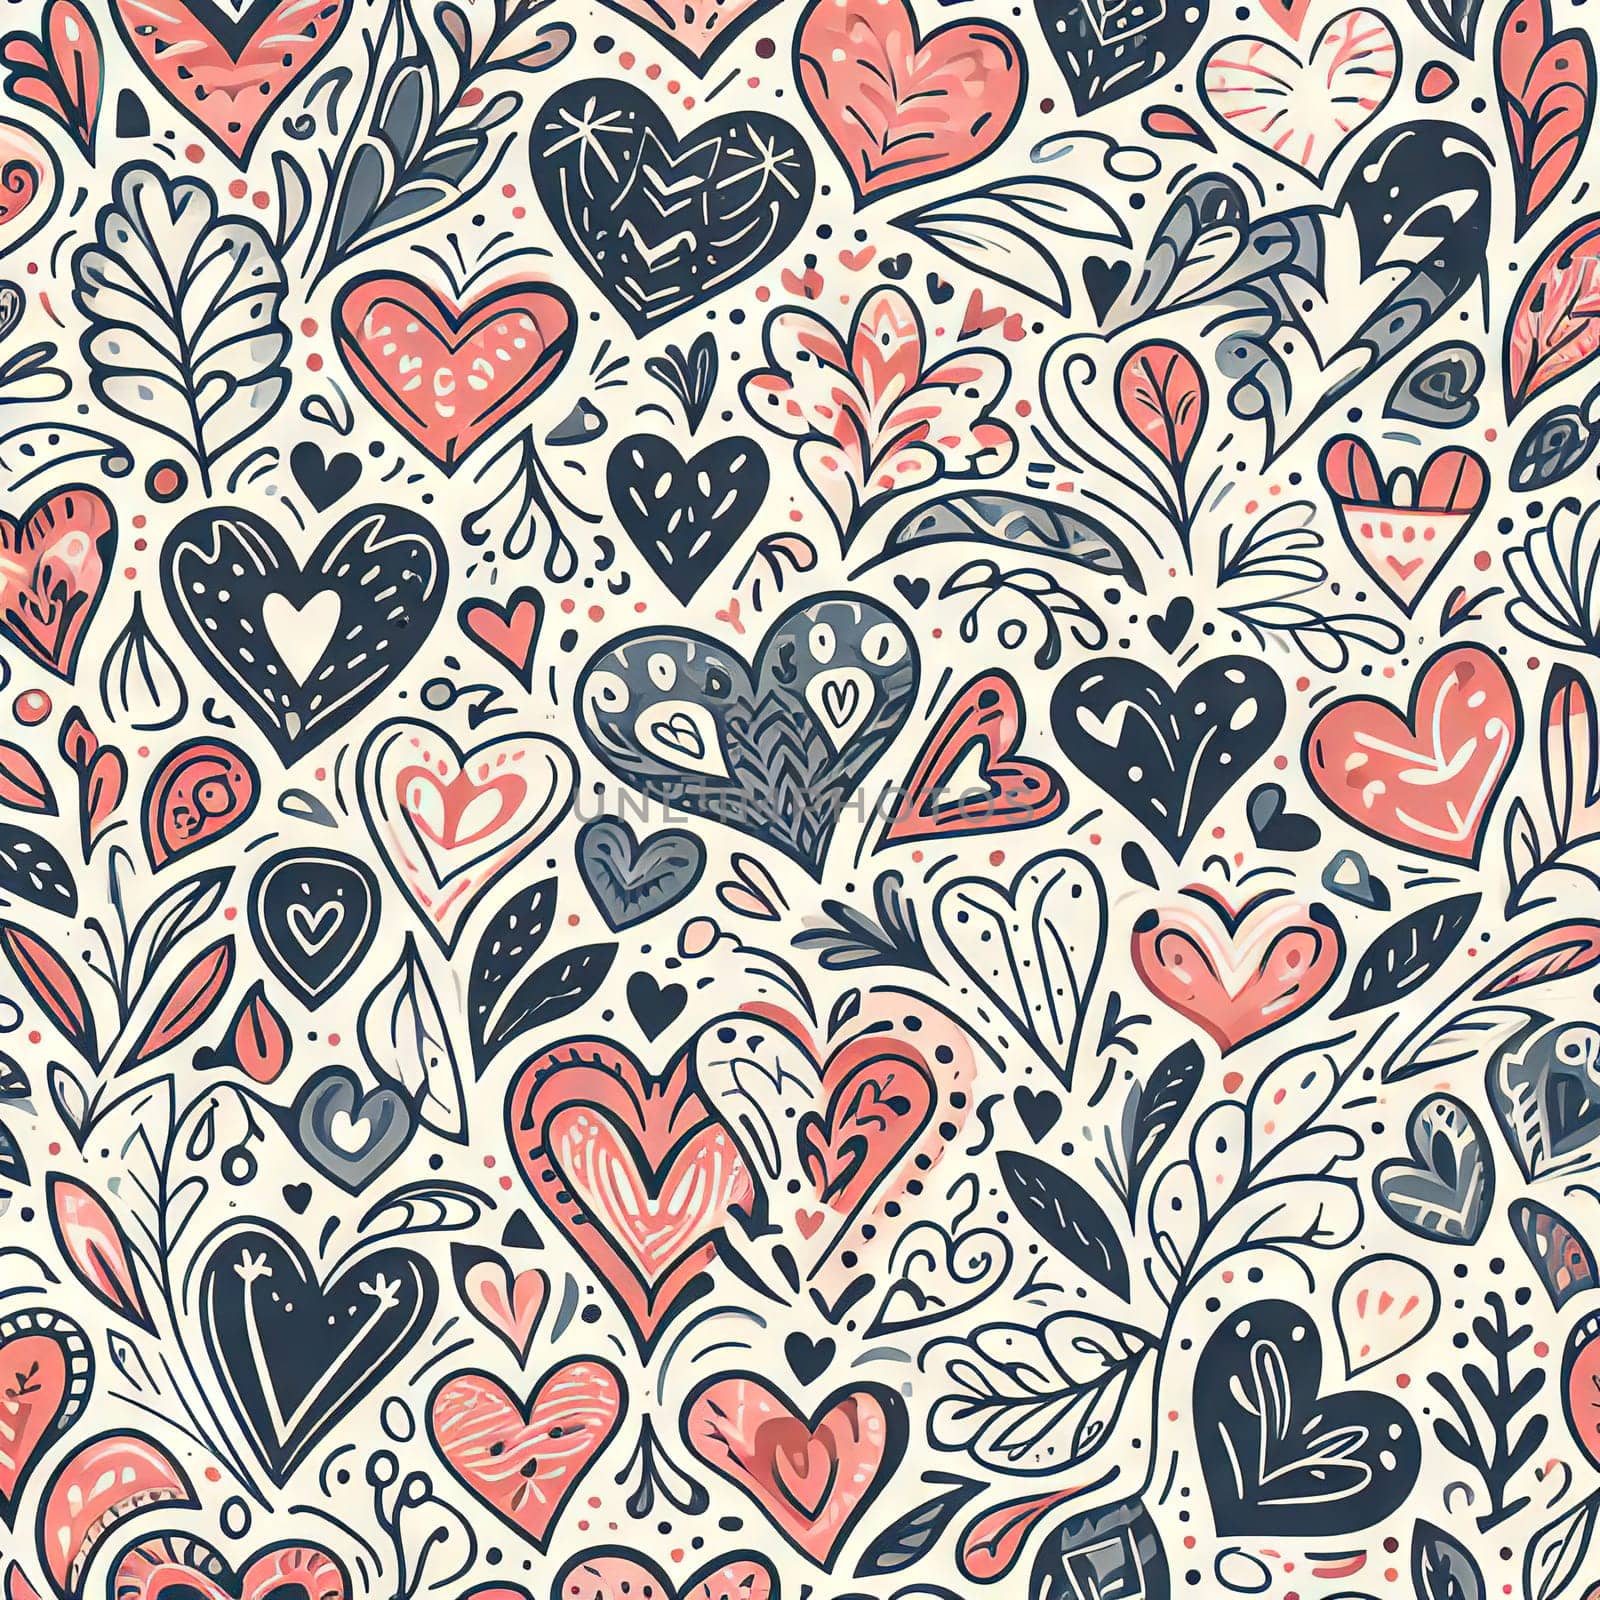 Stylish graphic seamless pattern with hearts. Black and red sketchy background by EkaterinaPereslavtseva